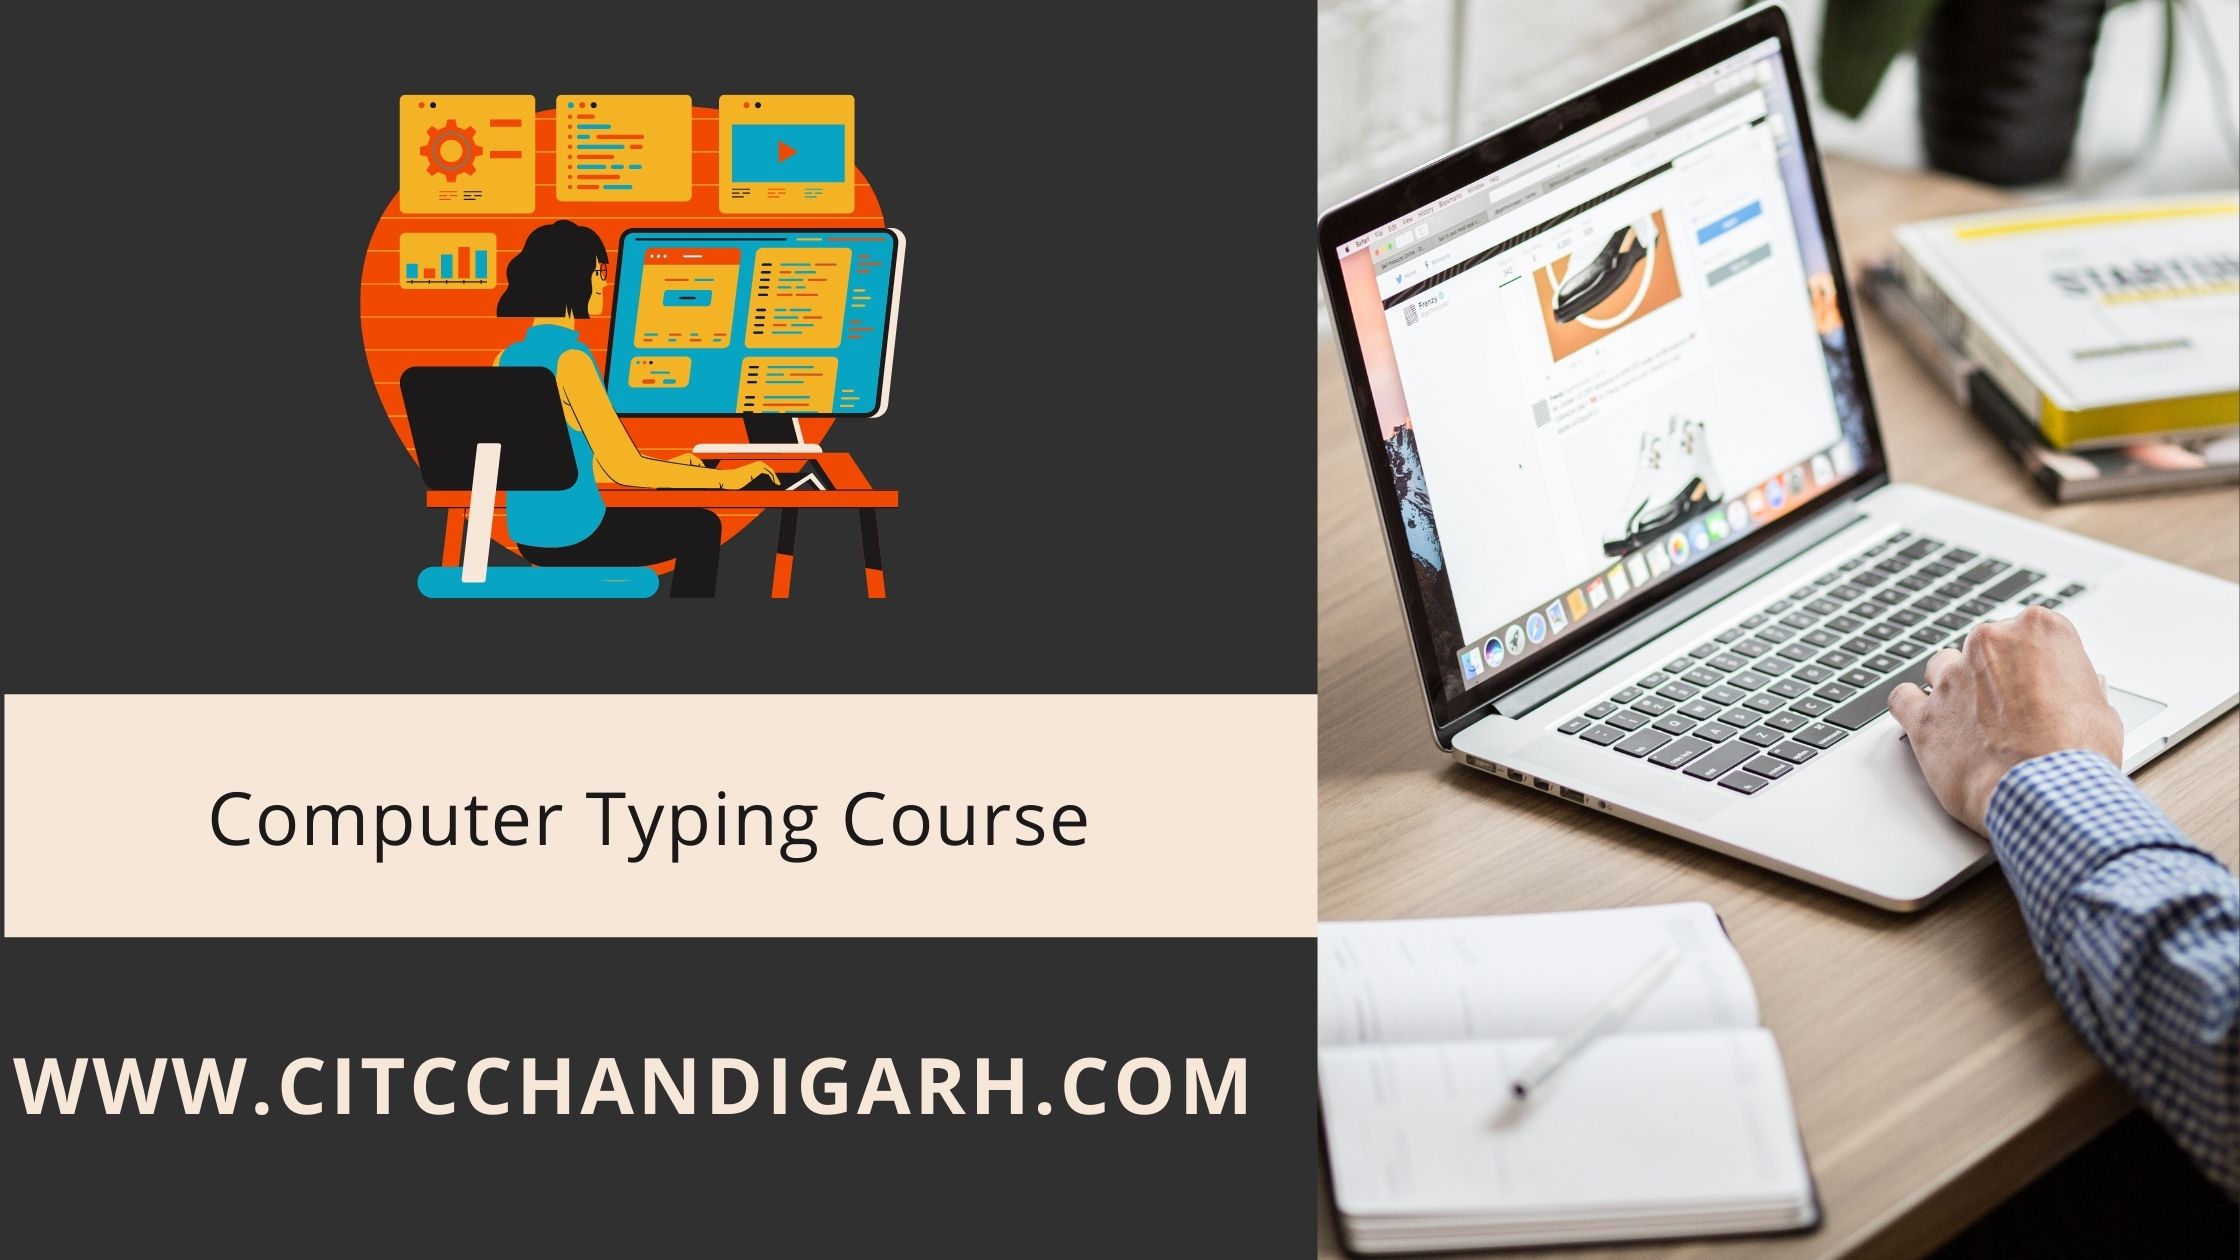 Computer typing course | Computer Typing Institute in Chandigarh